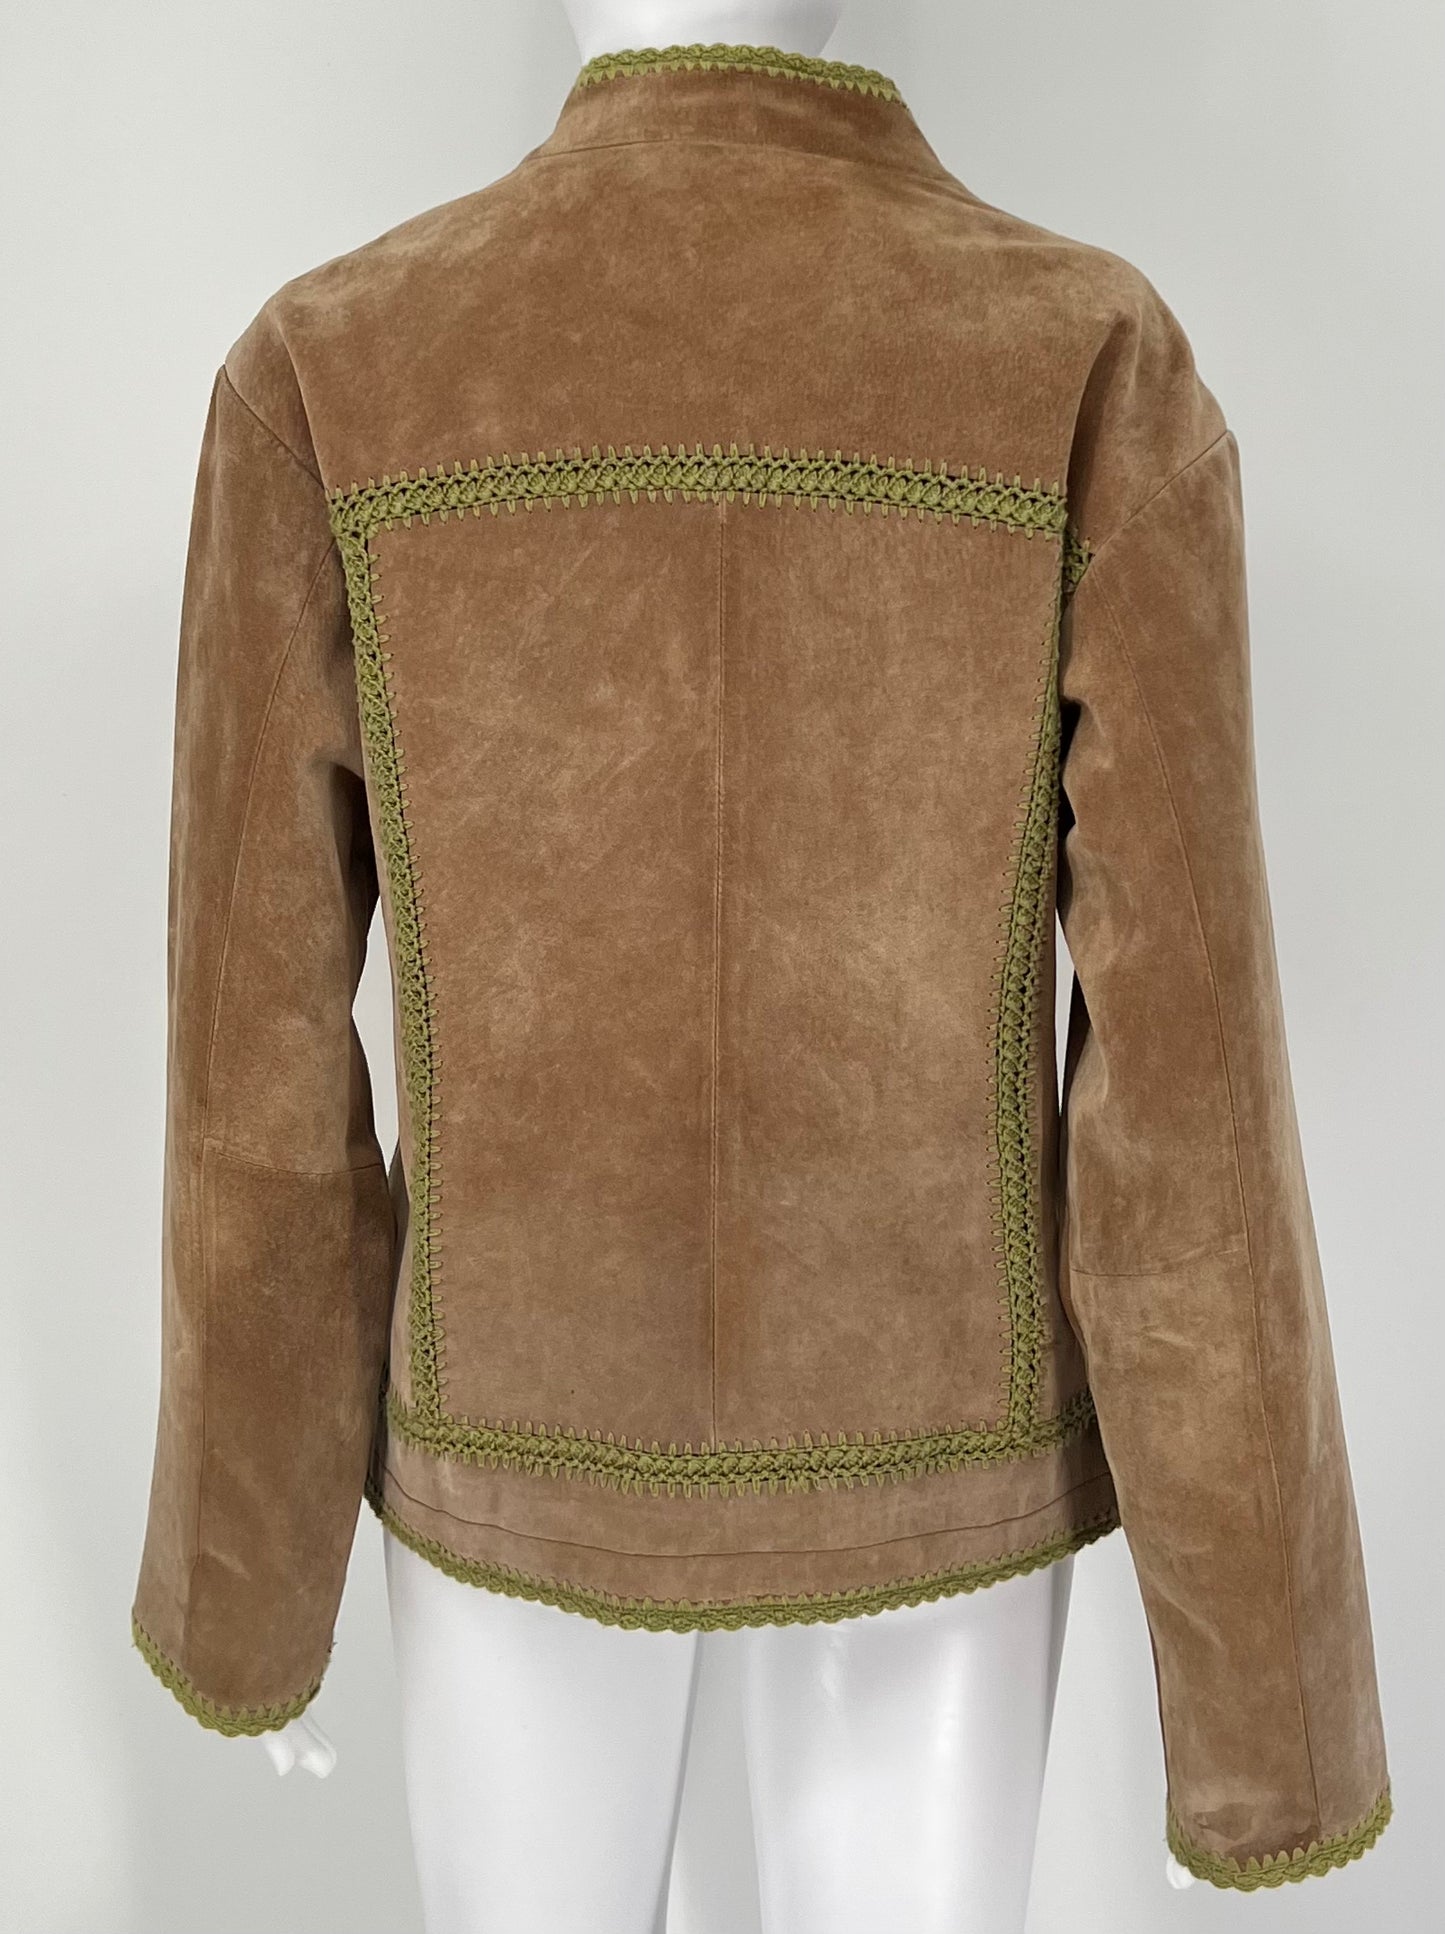 Cabelas Suede Leather Jacket with Green Crotchet Braided Detailing Trim | Sz: M